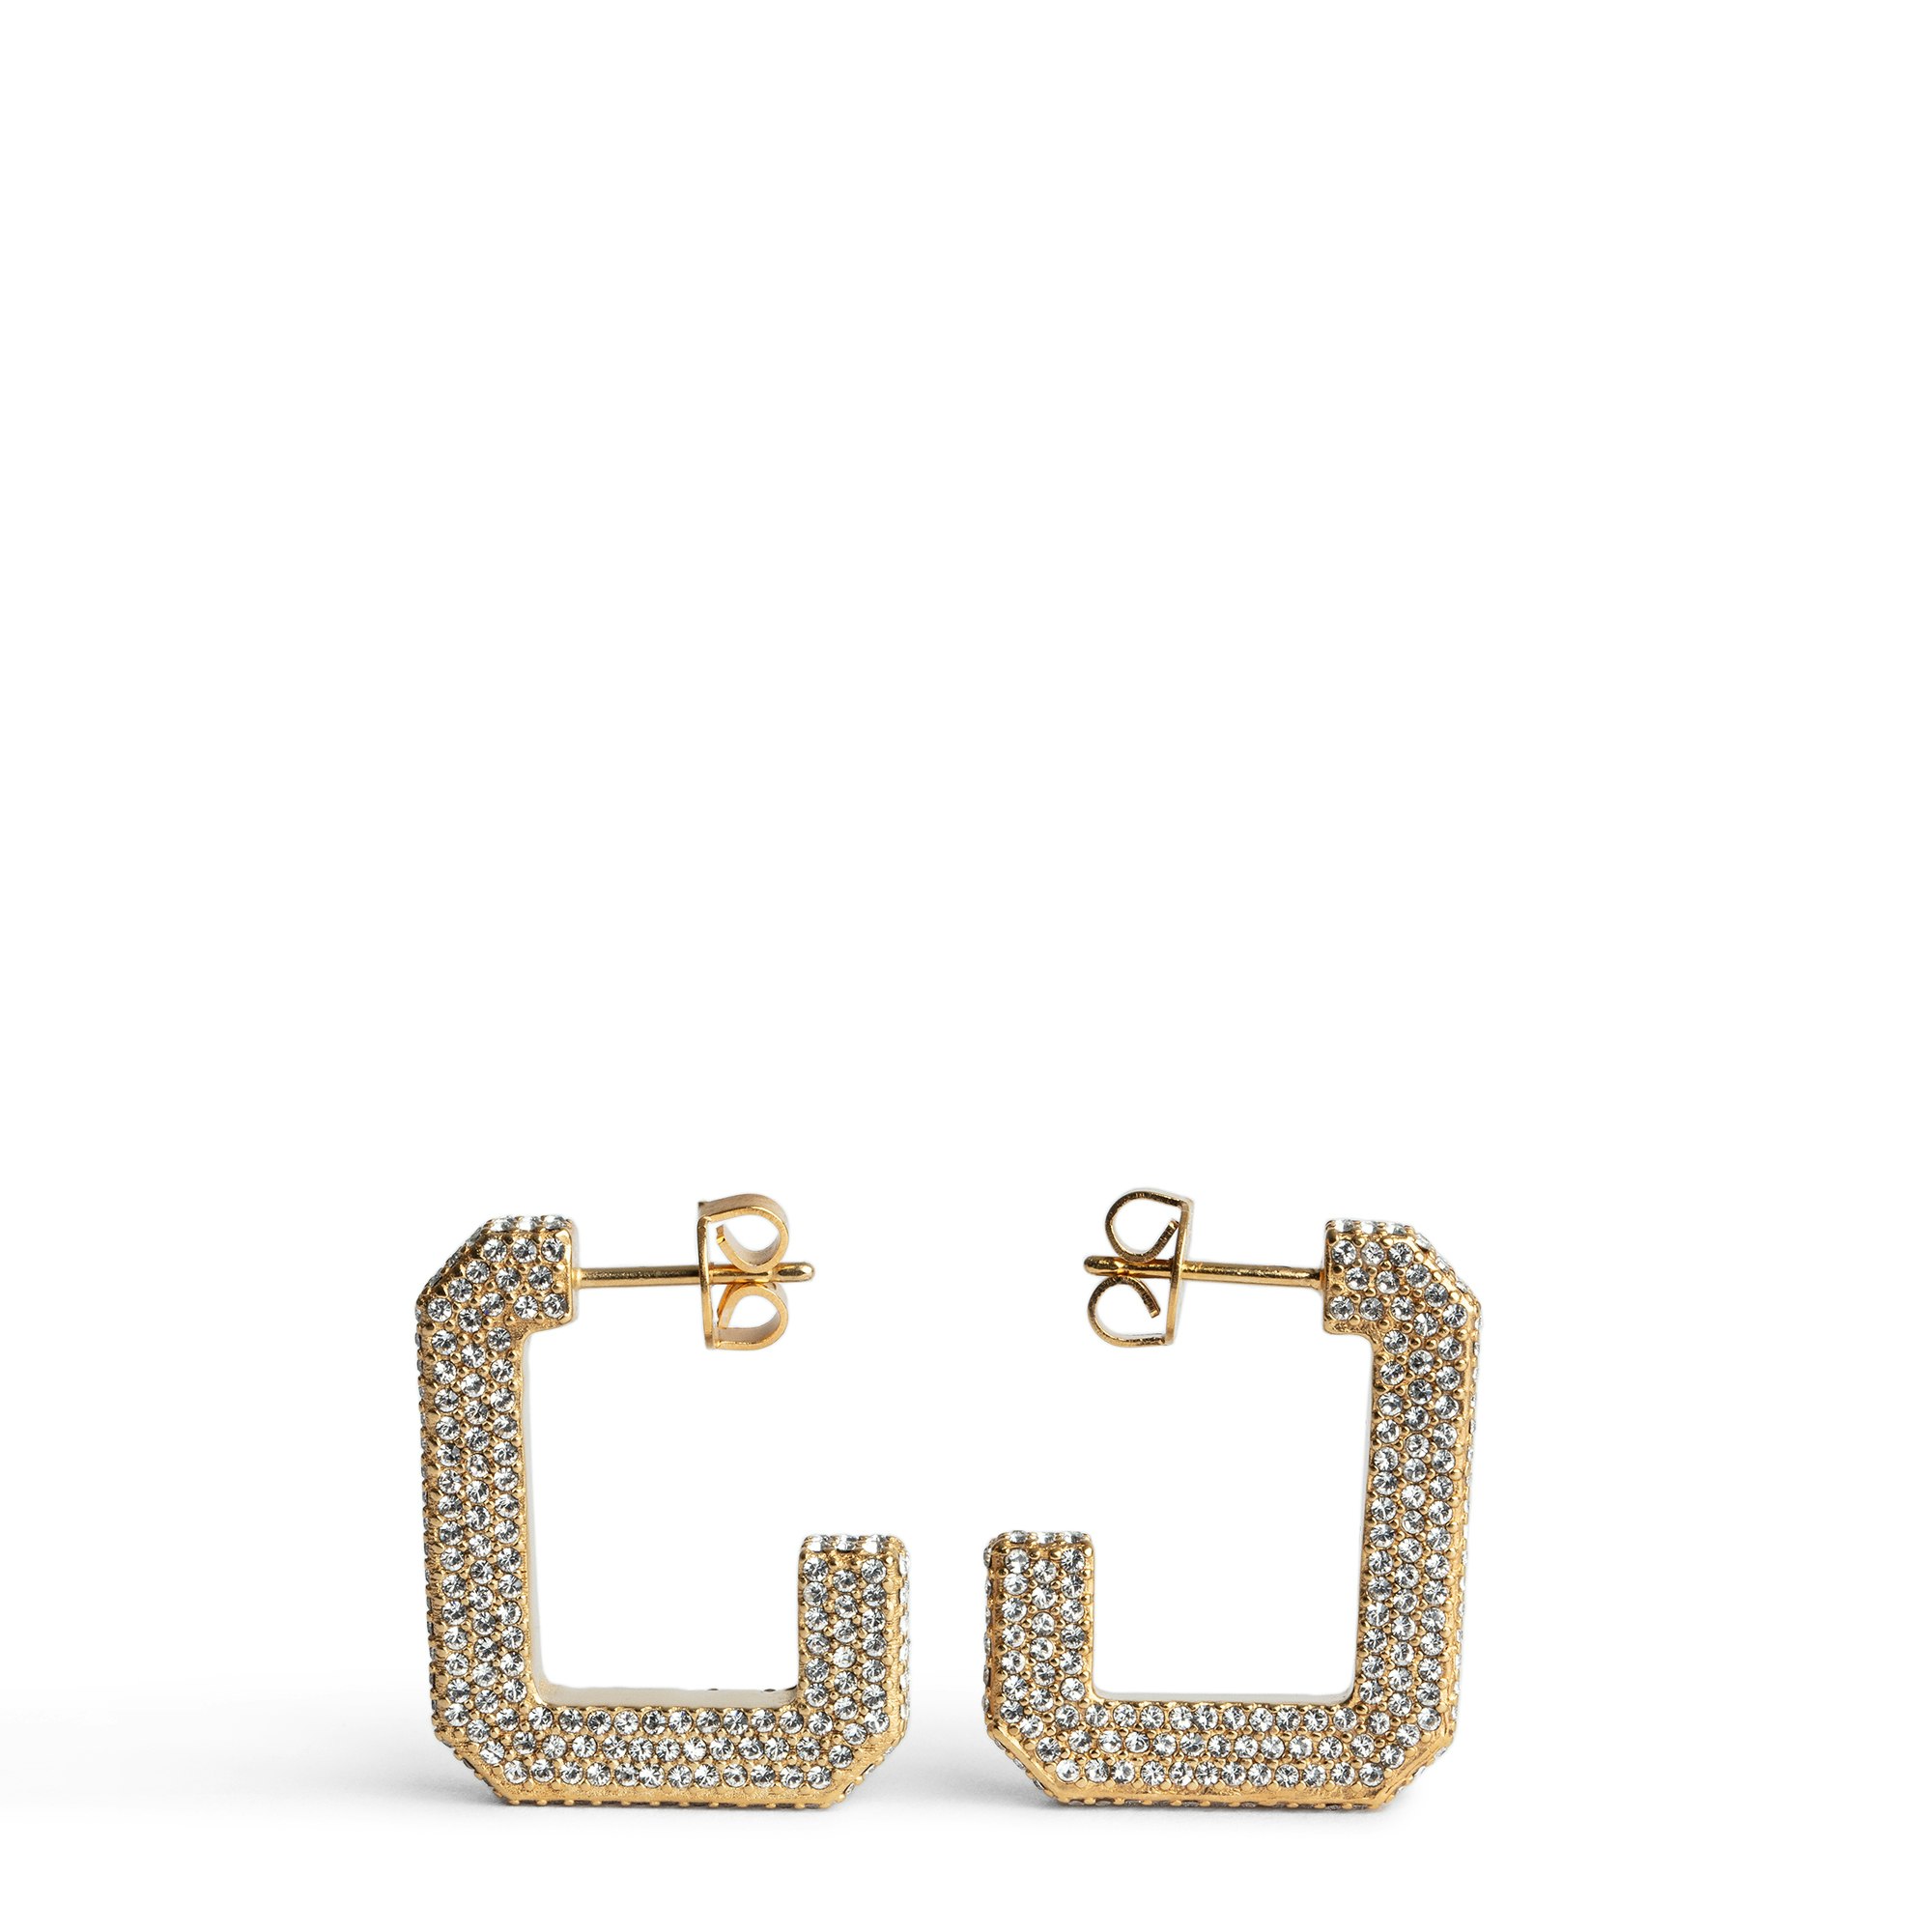 Zadig & Voltaire Cecilia Strass Earrings